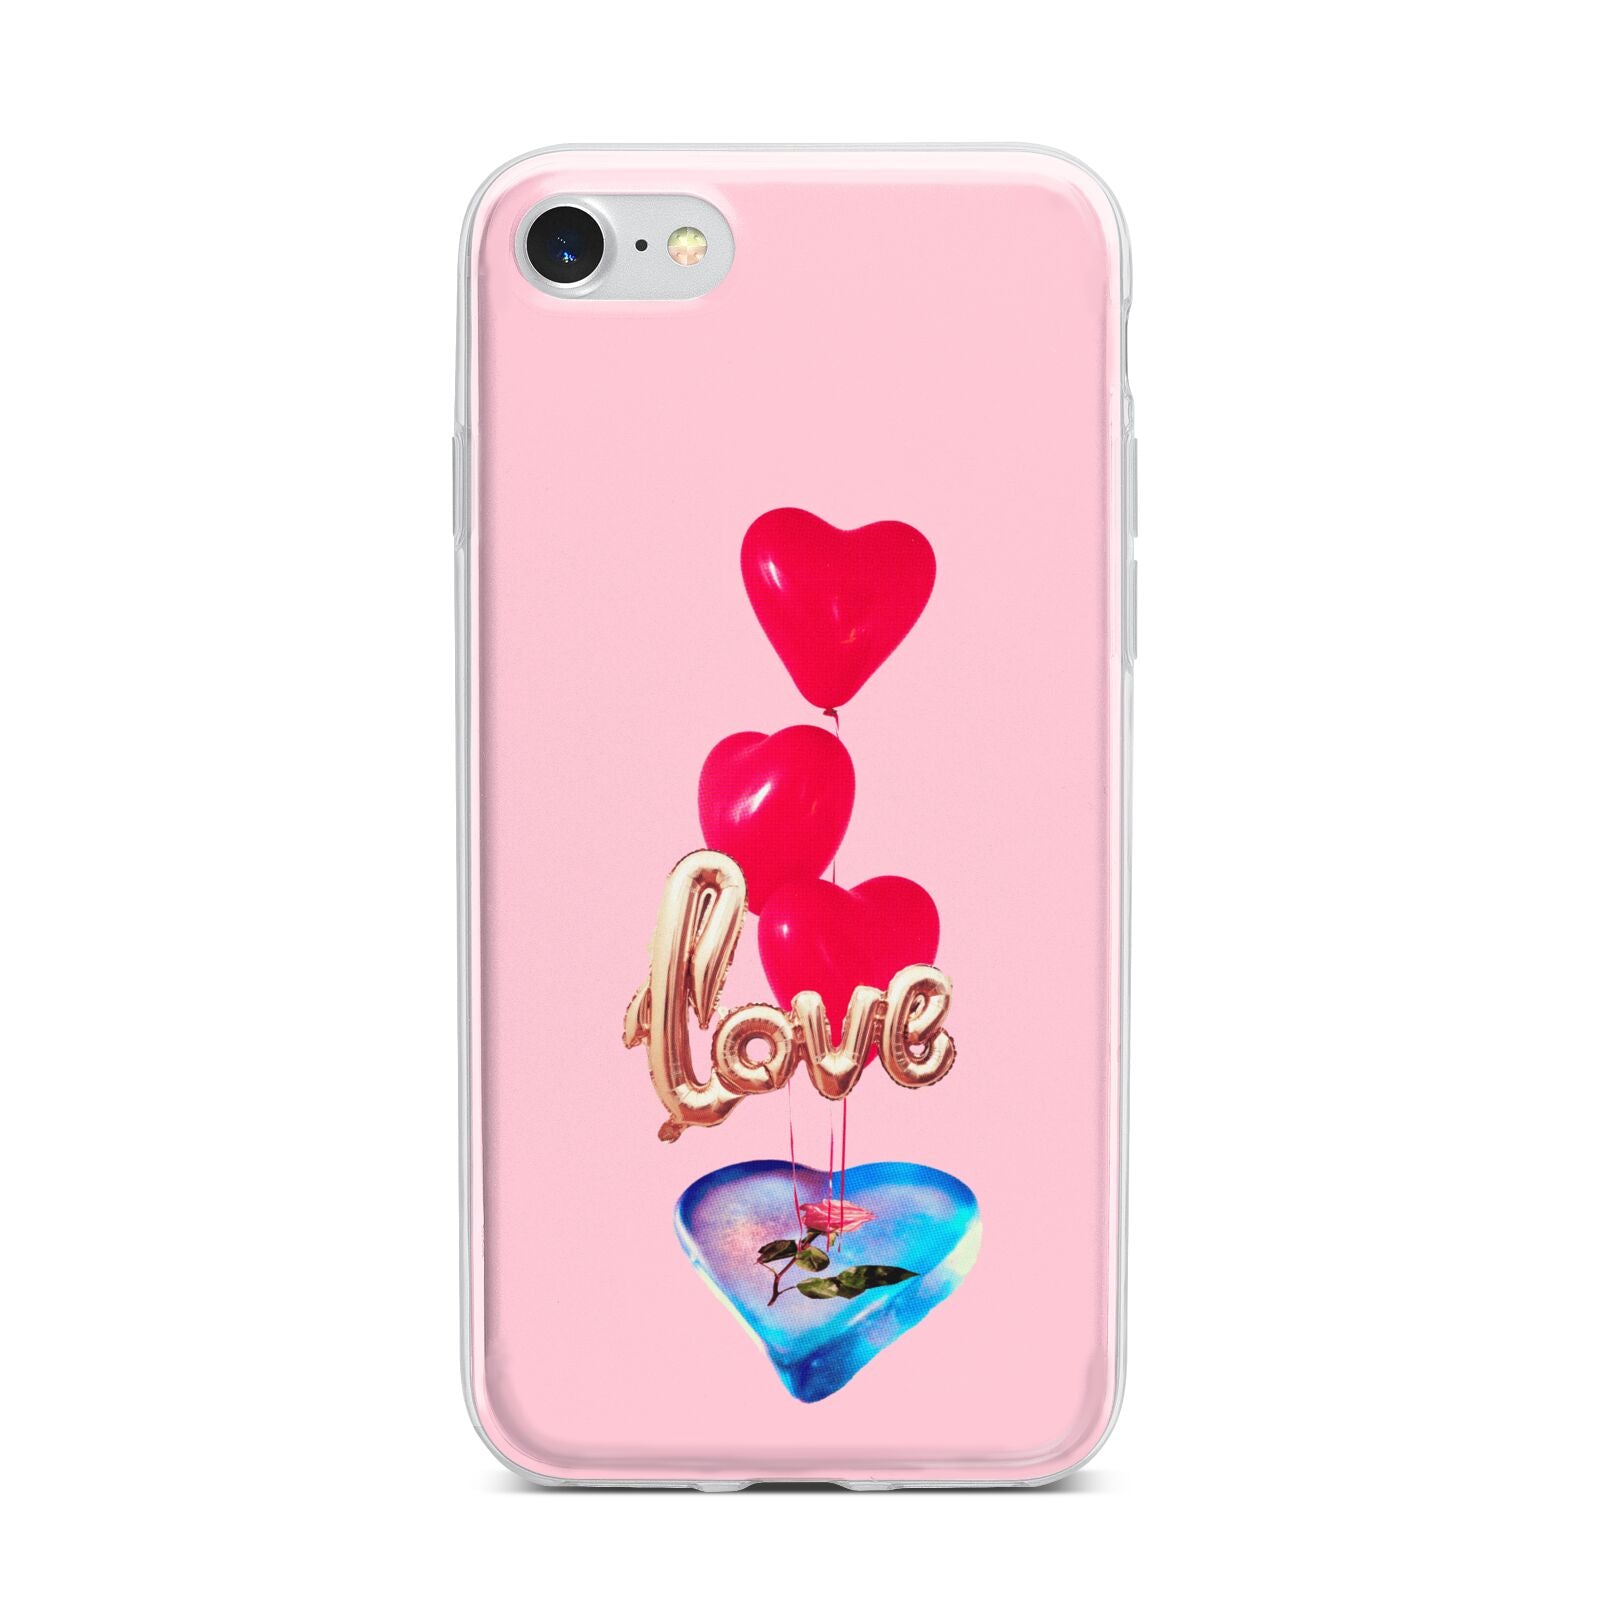 Love bubble balloon iPhone 7 Bumper Case on Silver iPhone